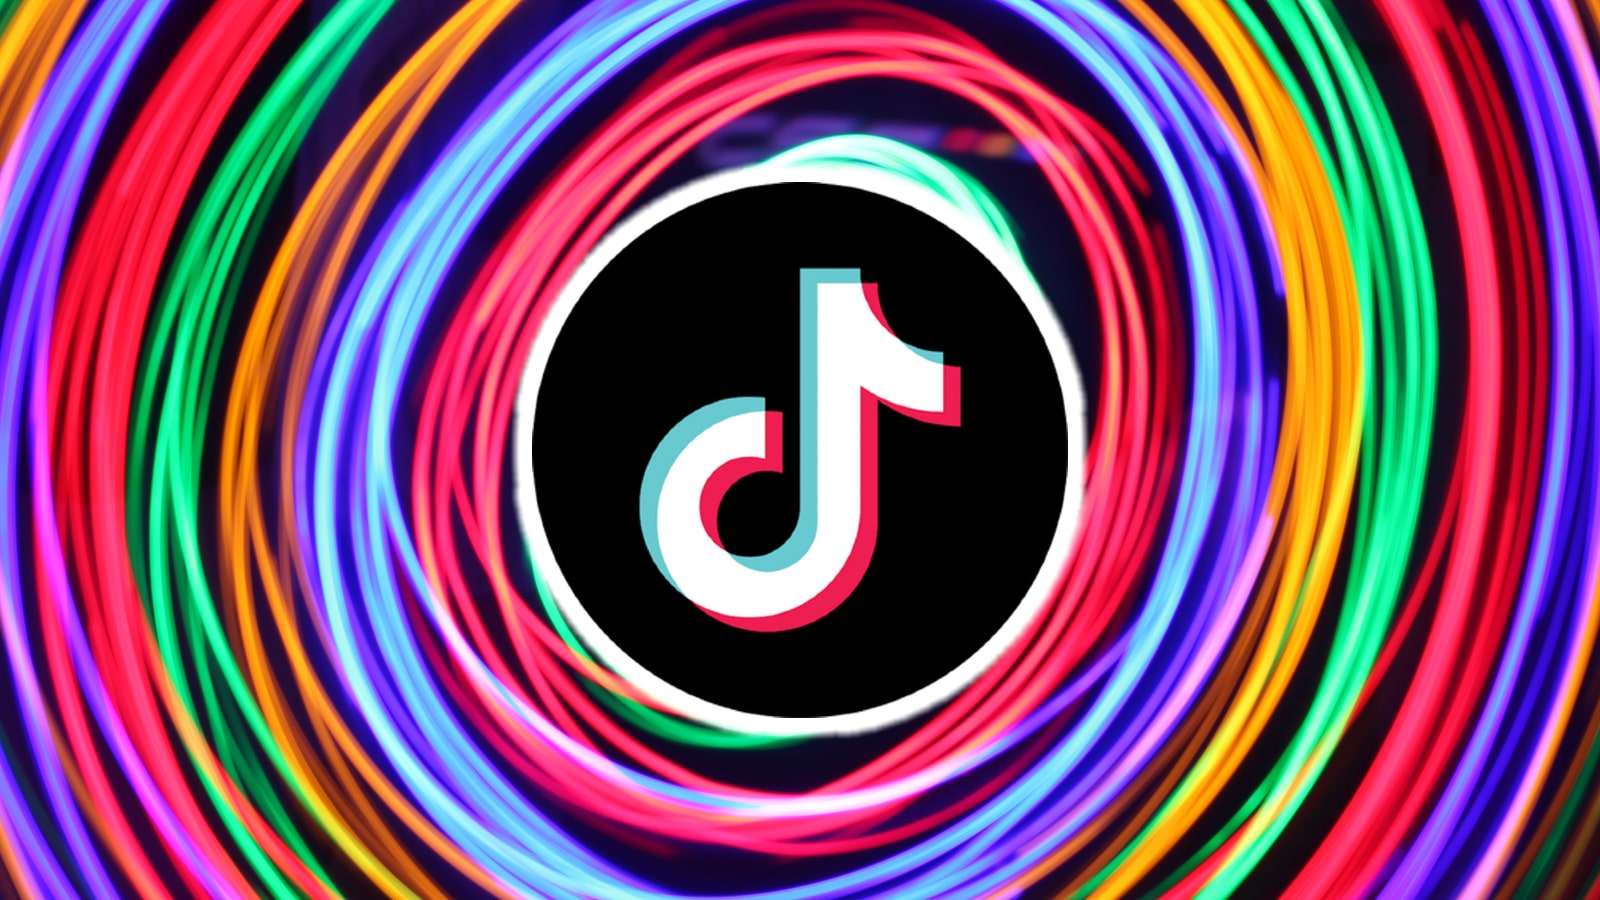 TikTok logo in the middle of color lights